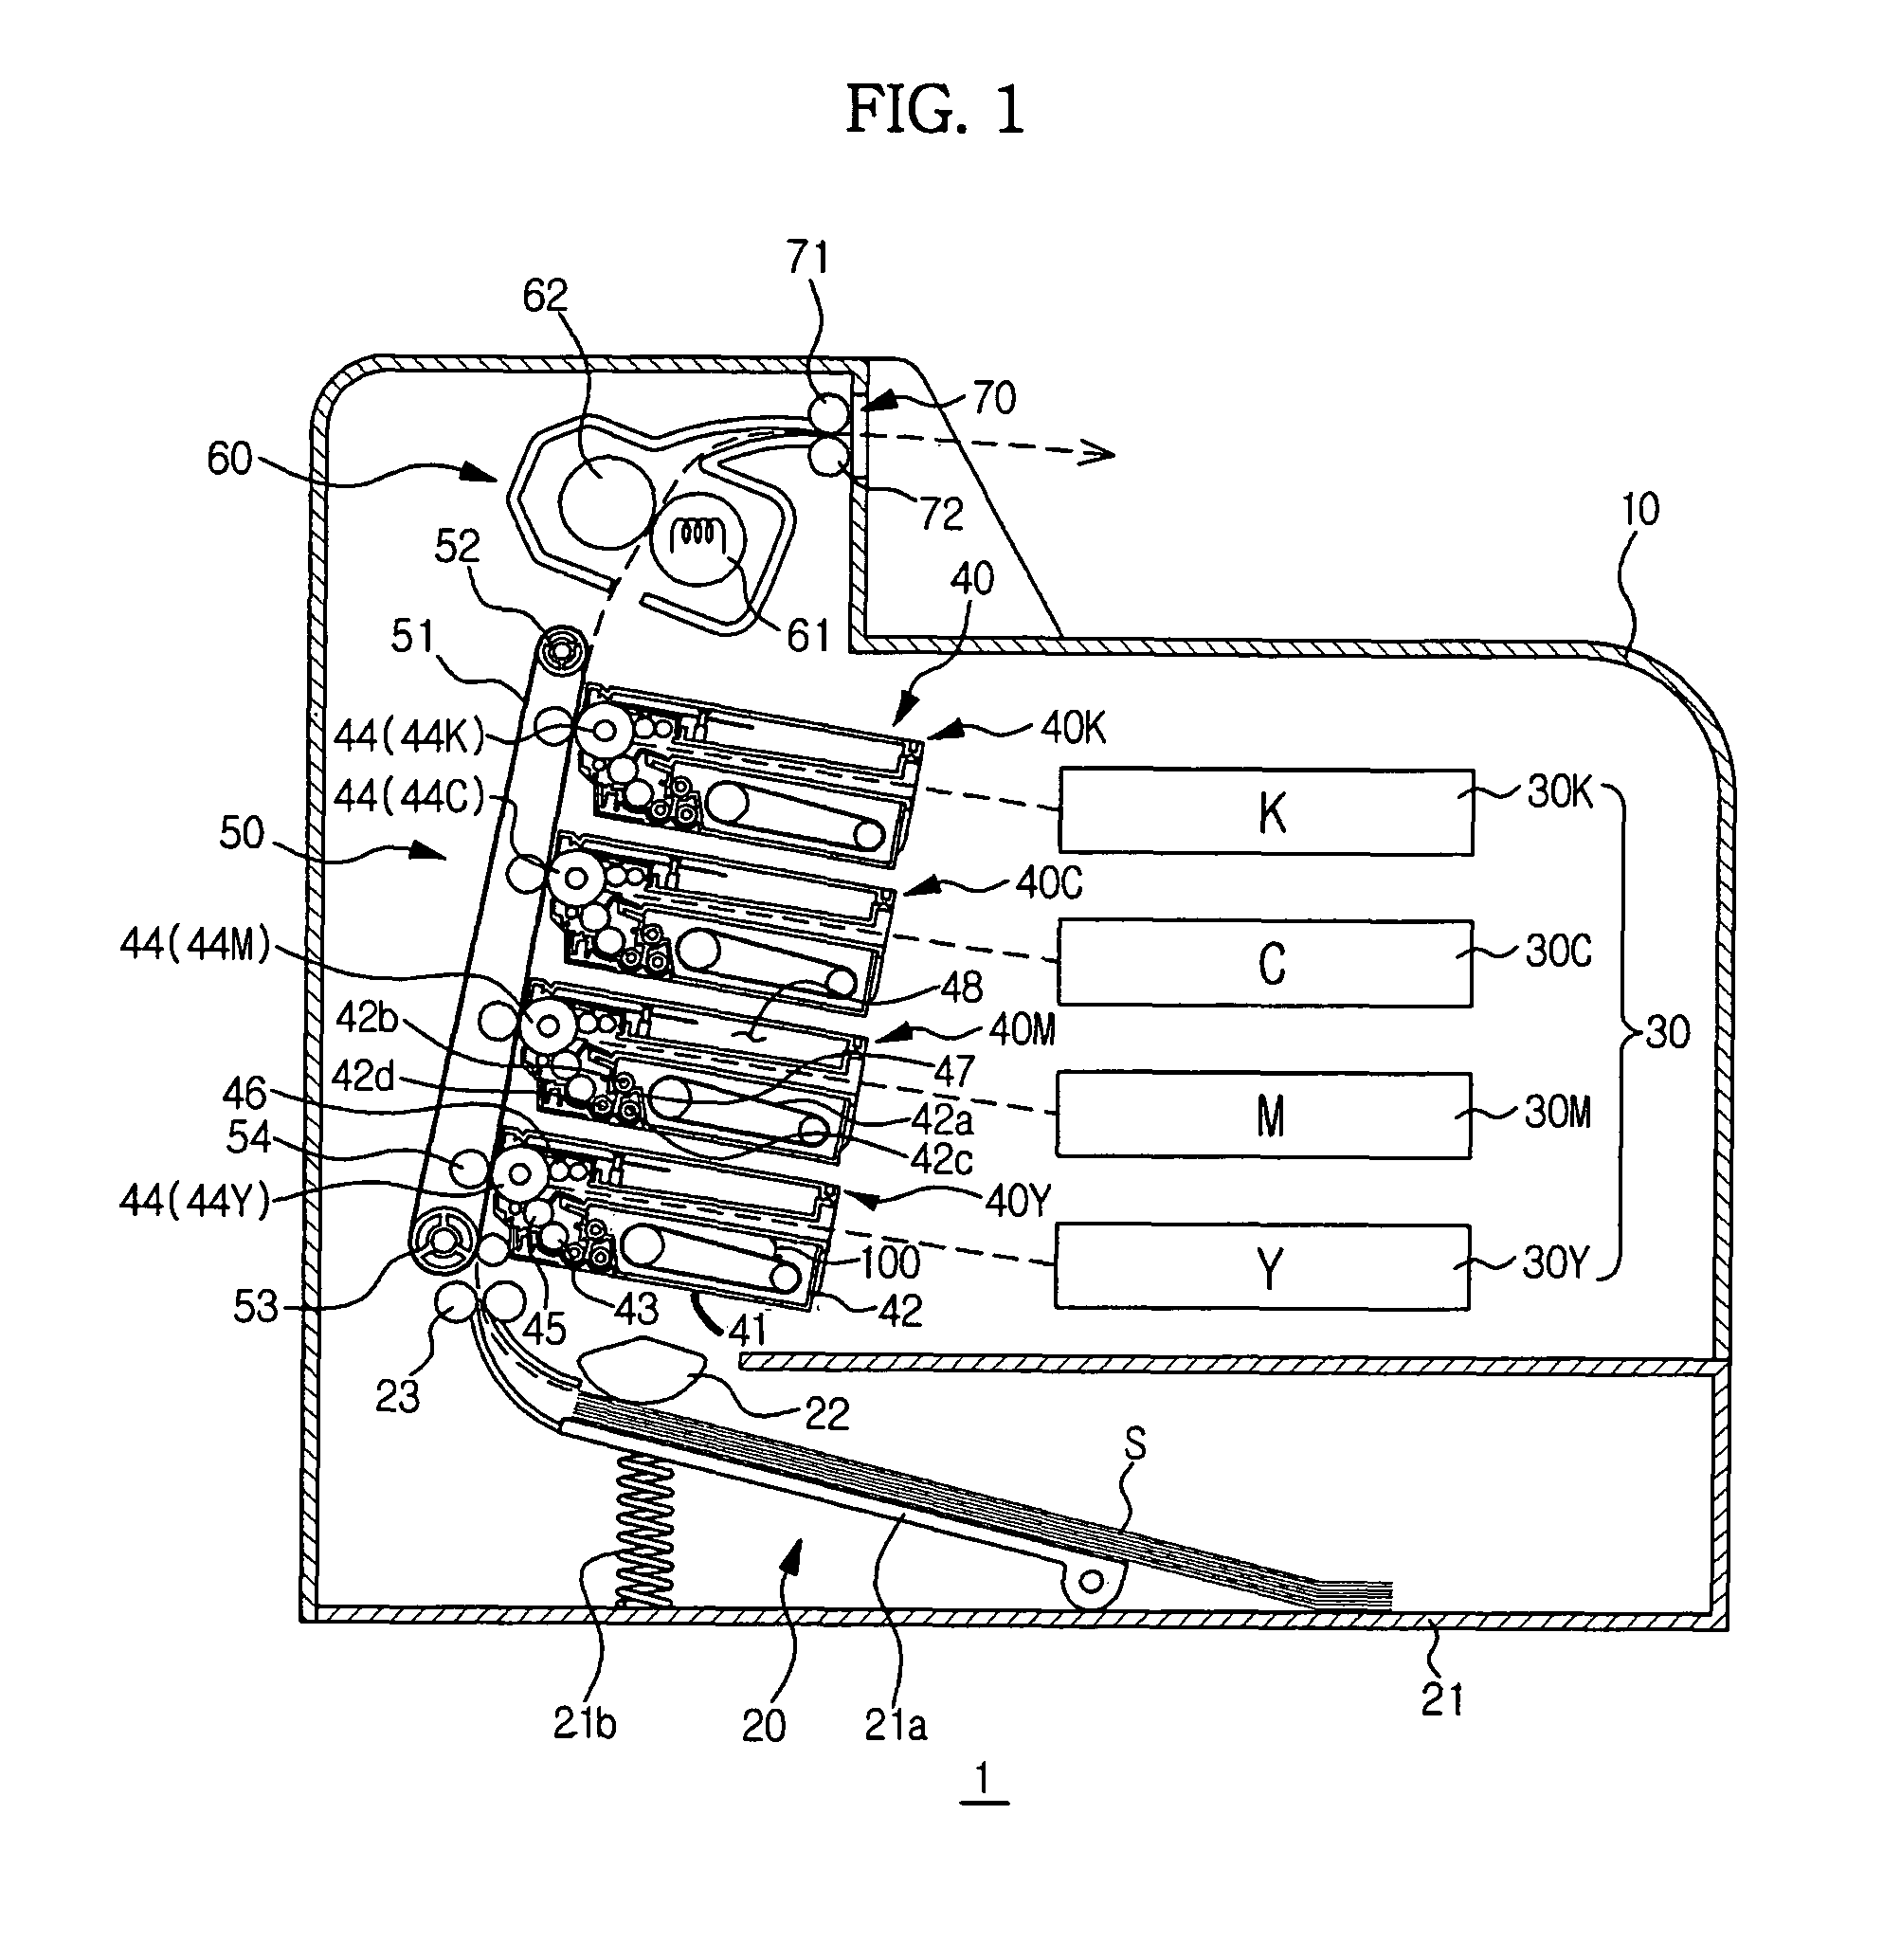 Driving device usable with image forming apparatus and image forming apparatus having the same